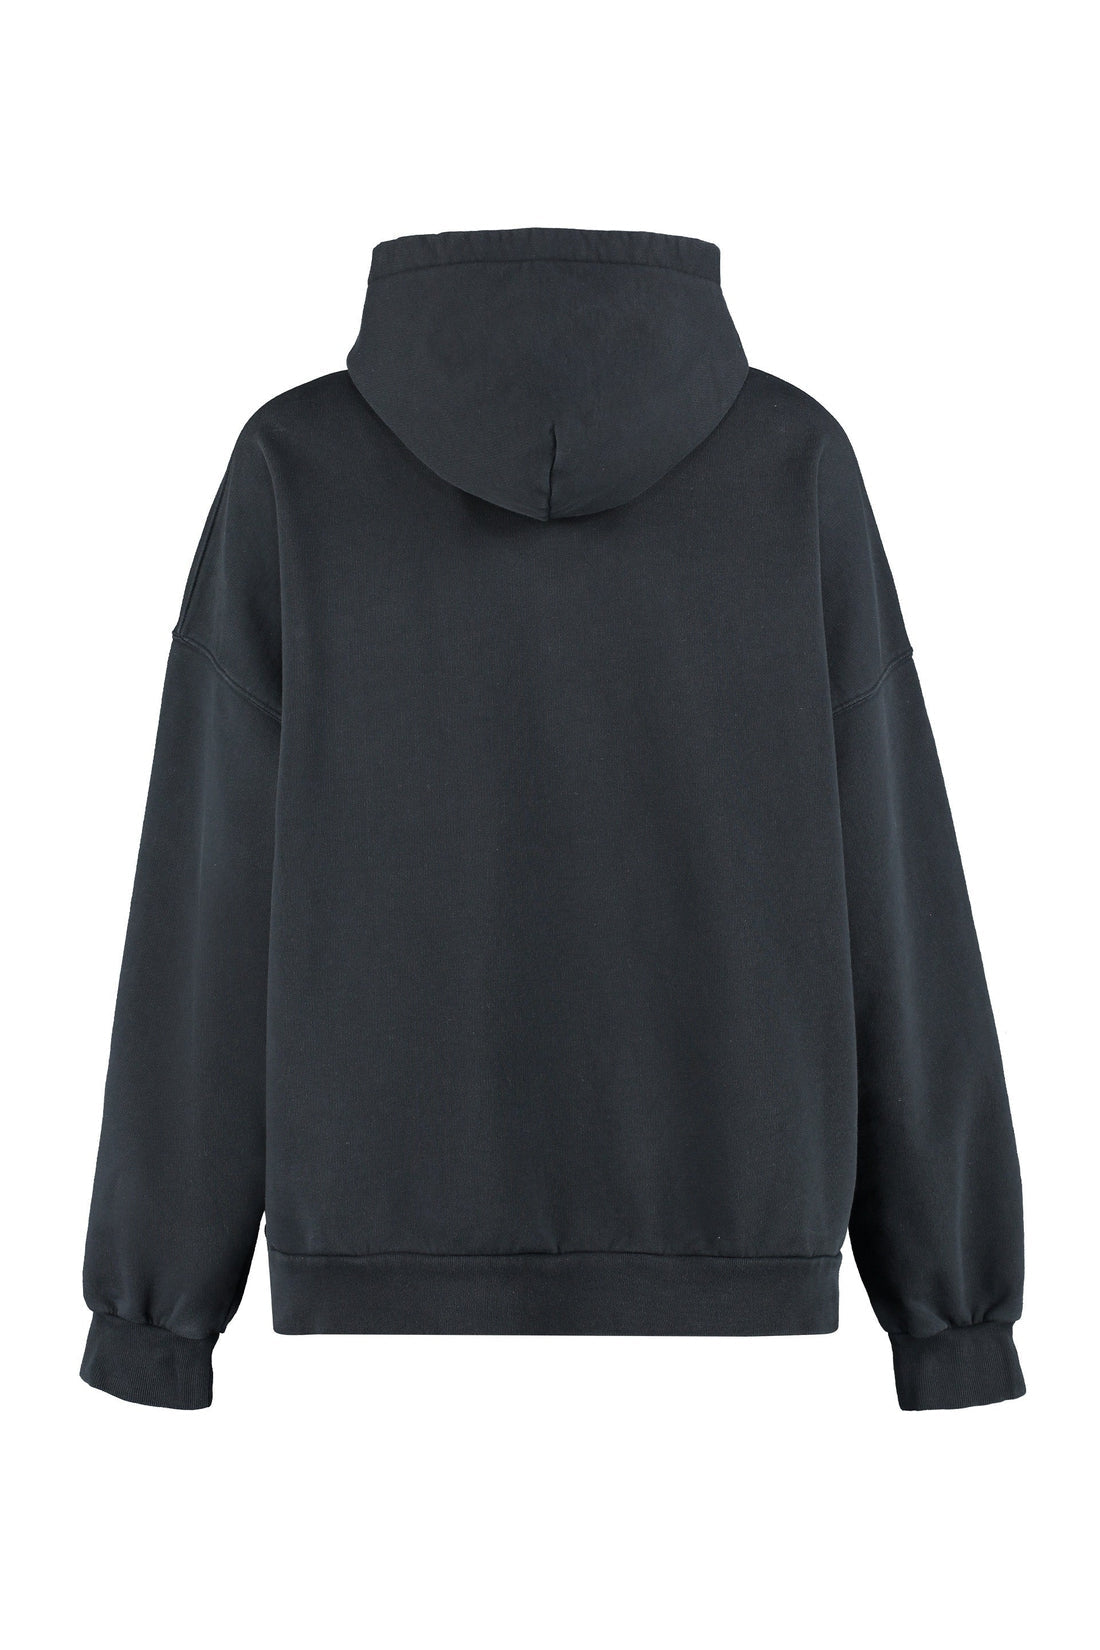 Balenciaga-OUTLET-SALE-Cropped hoodie-ARCHIVIST